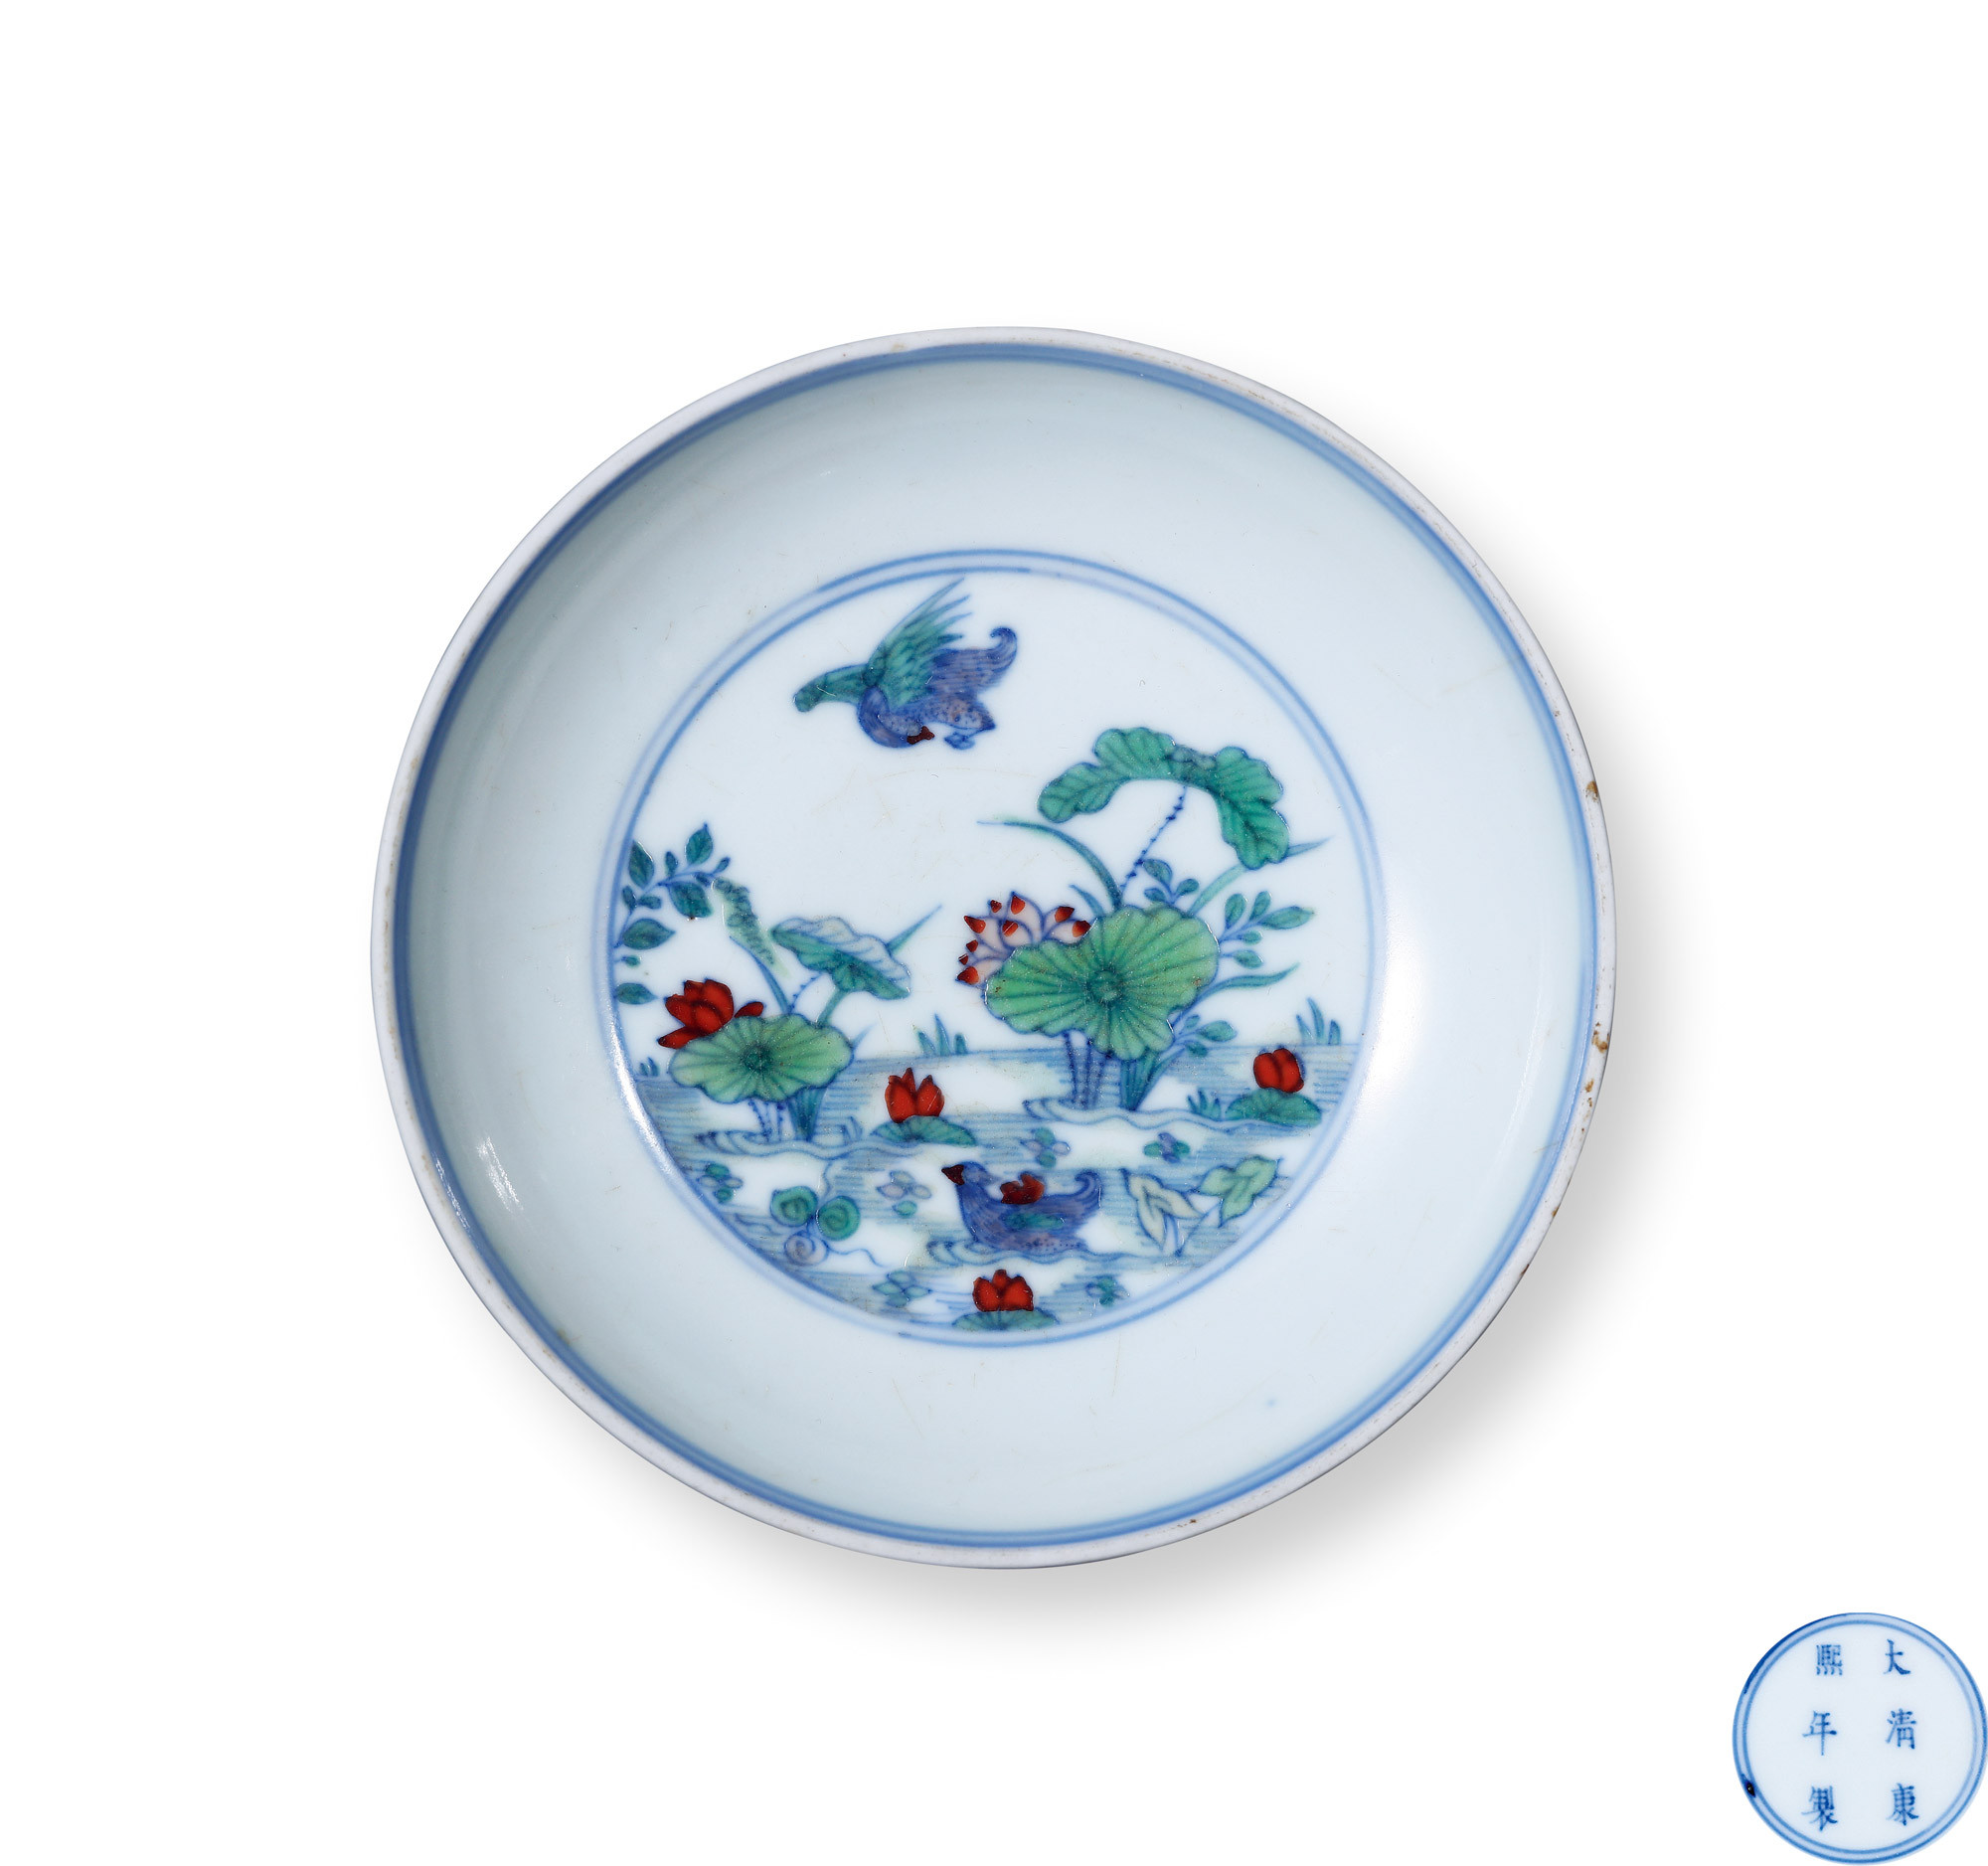 A CONTENDING COLORS PLATE WITH LOTUS DESIGN